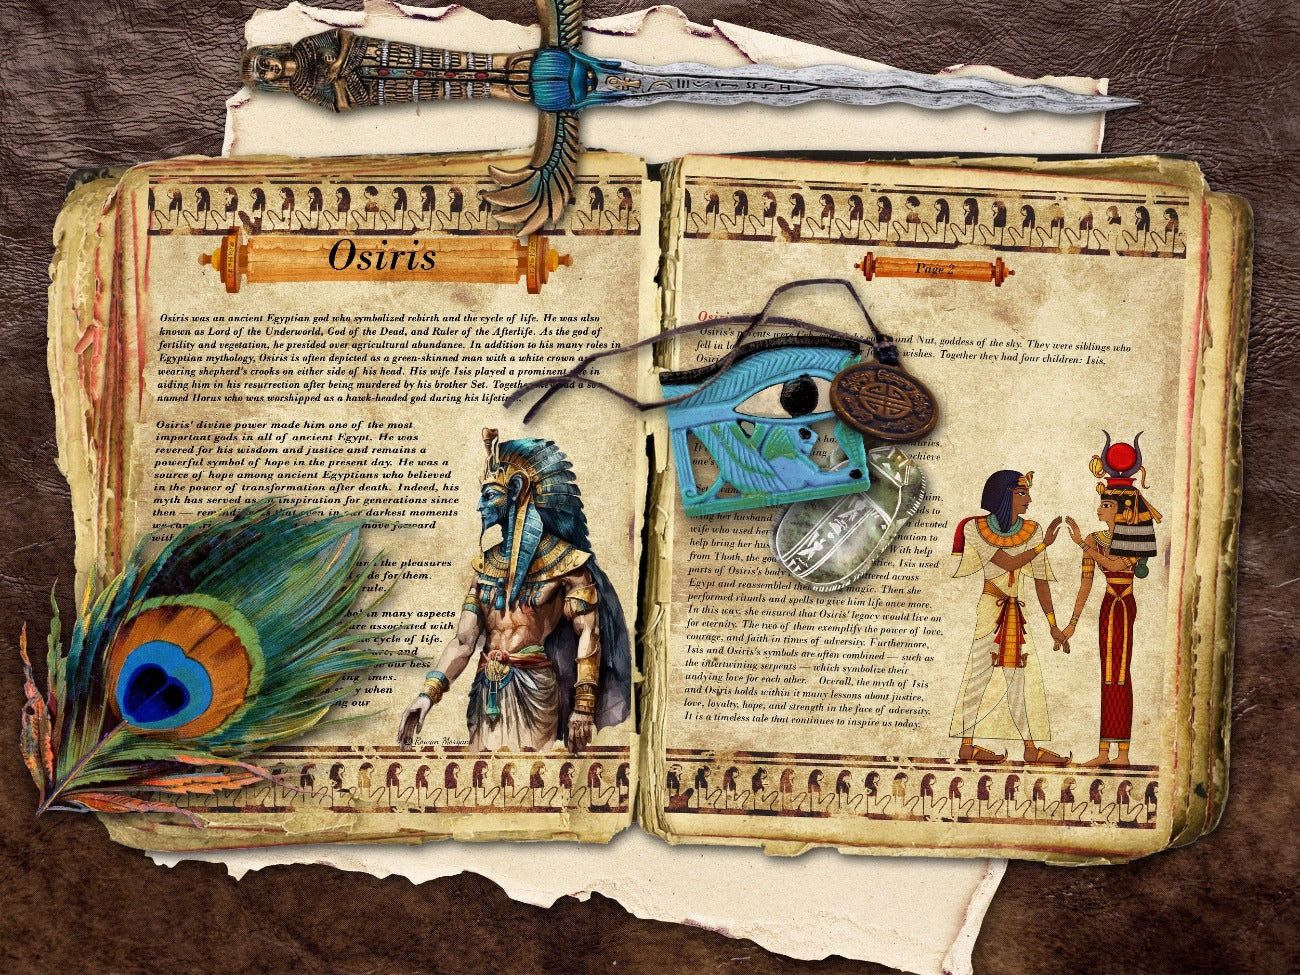 OSIRIS Egyptian God, 5 Pages, Egyptian Mythology Isis and Osiris, Auset Lord of the Underworld, Ancient Egypt Printable Witchcraft Grimoire - Morgana Magick Spell